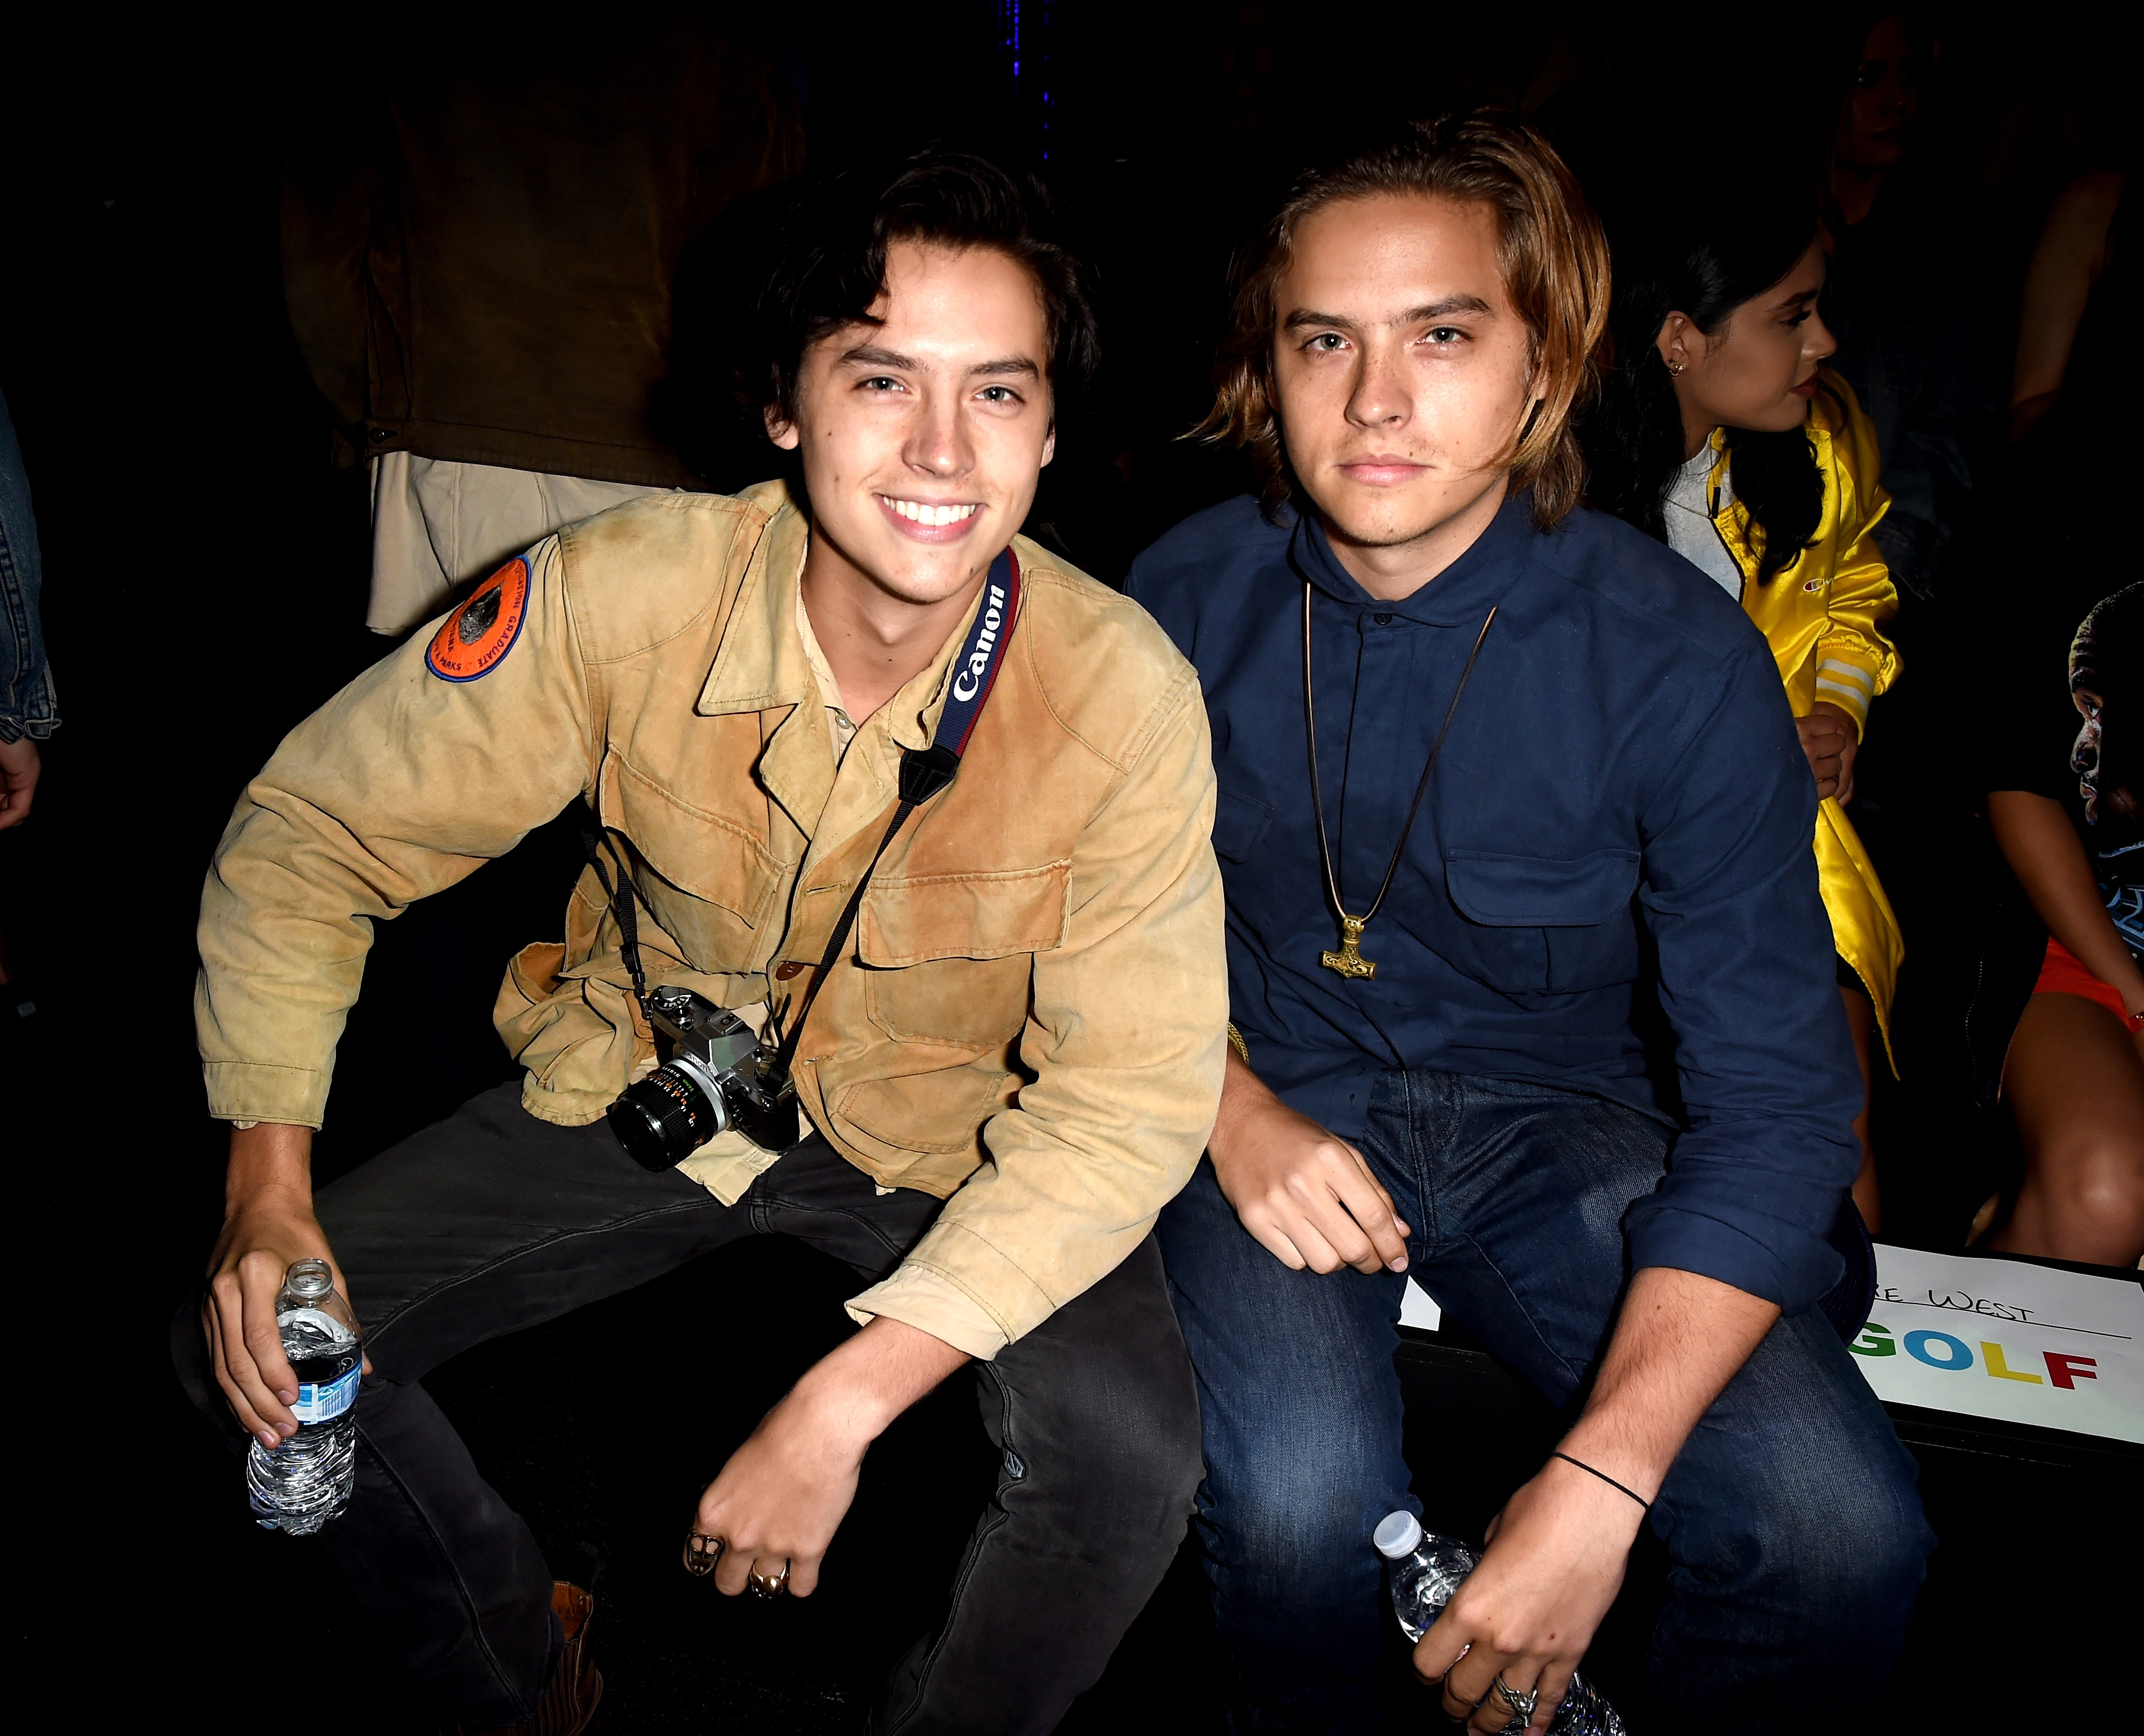 Close-up of Dylan and Cole smiling, sitting together, and holding bottles of water